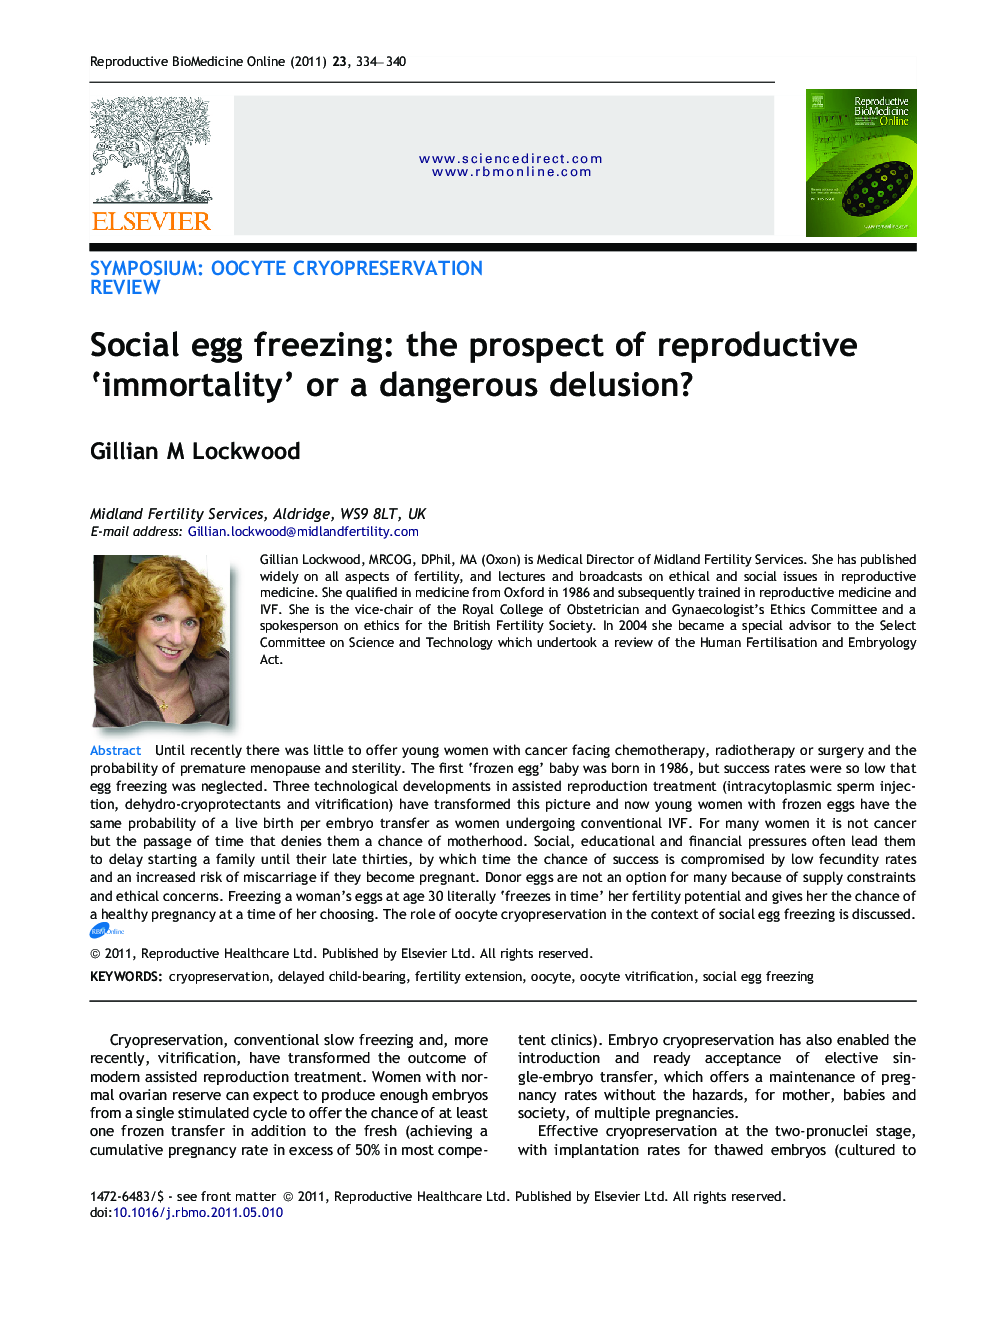 Social egg freezing: the prospect of reproductive ‘immortality’ or a dangerous delusion? 